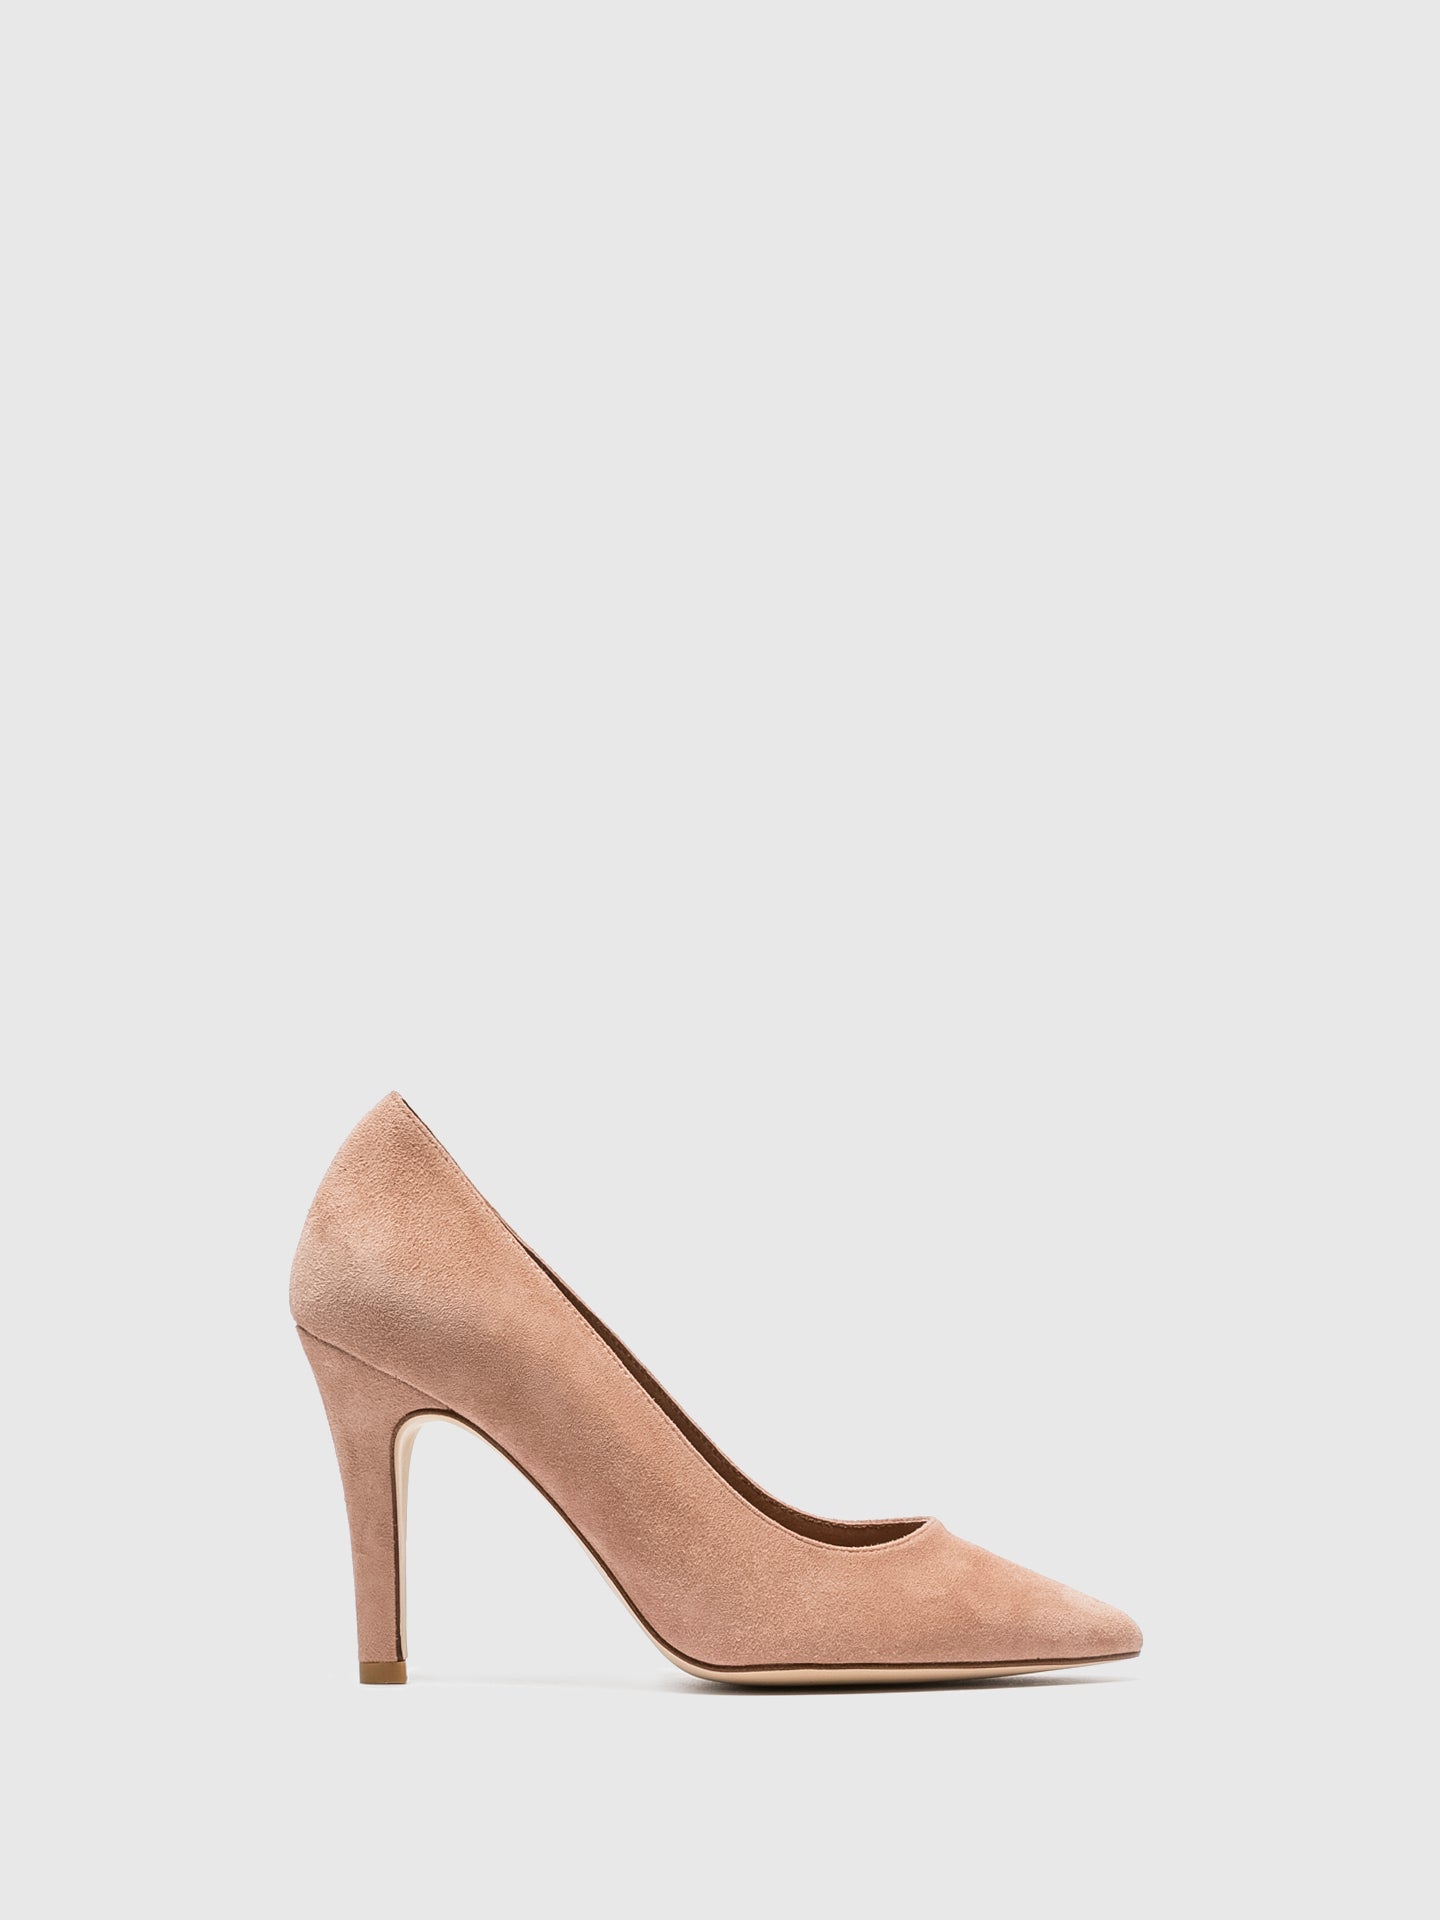 Foreva Pink Classic Pumps Shoes